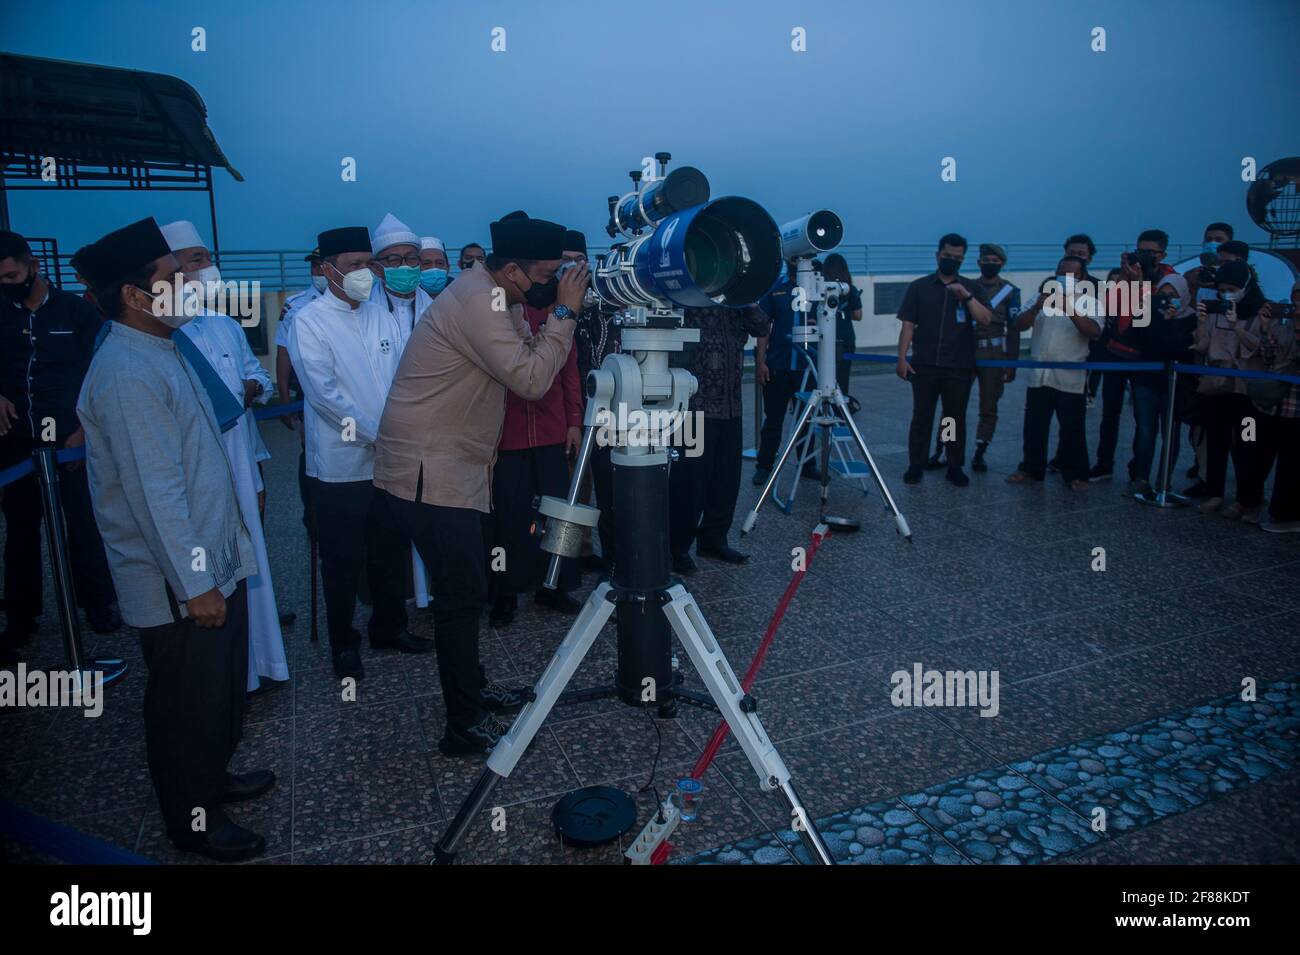 Medan, Indonesia. 12th Apr, 2021. Medan Mayor, Bobby Nasution and the Indonesian Ulema Council in Medan are participating in the process of monitoring the 'Hilal' or the time when the holy month of Ramadan is entered at the Observatory for Falak Science at the Muhammadiyah University of North Sumatra in Medan, Indonesia on April 12, 2021. The government announces that the majority of Indonesians are Muslims will perform fasting on April 13, 2021, which is in the holy month of Ramadan 1442 Hijriah. Photo by Sutanta Aditya/ABACAPRESS.COM Credit: Abaca Press/Alamy Live News Stock Photo